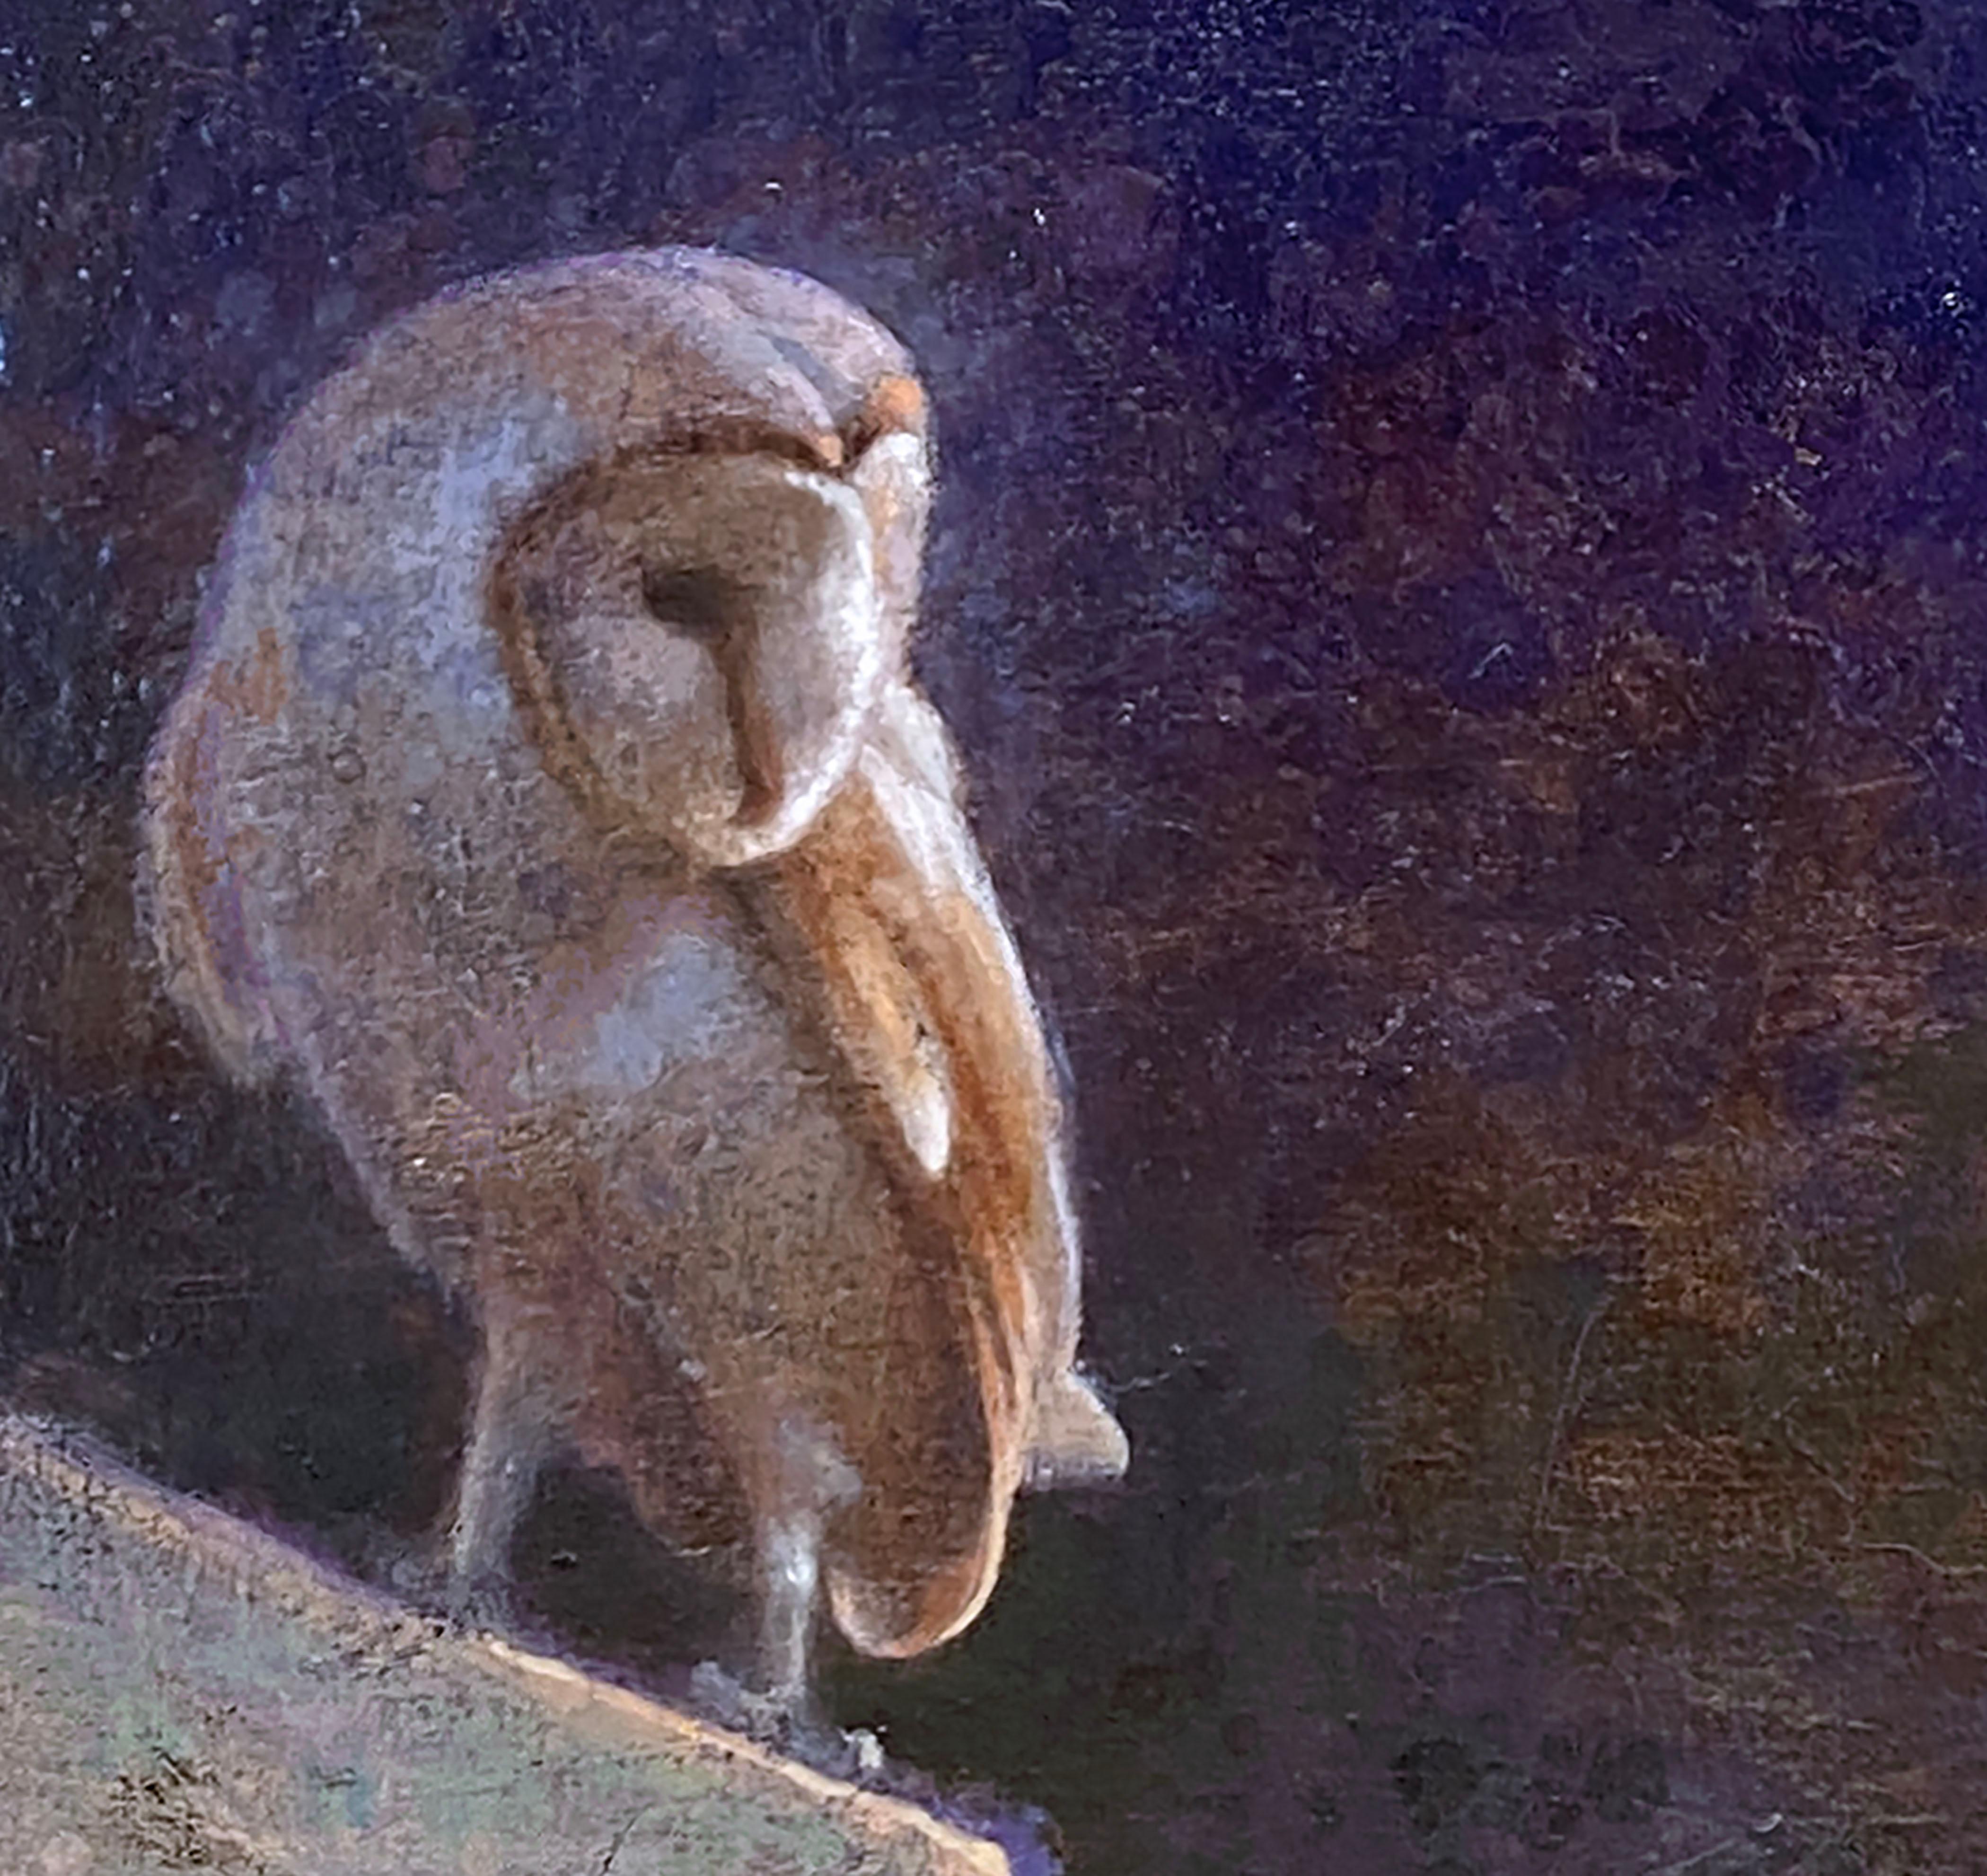 Barn Owl and Moon (barn owl, nocturne, reflection, prism of color) - Painting by Ewoud de Groot